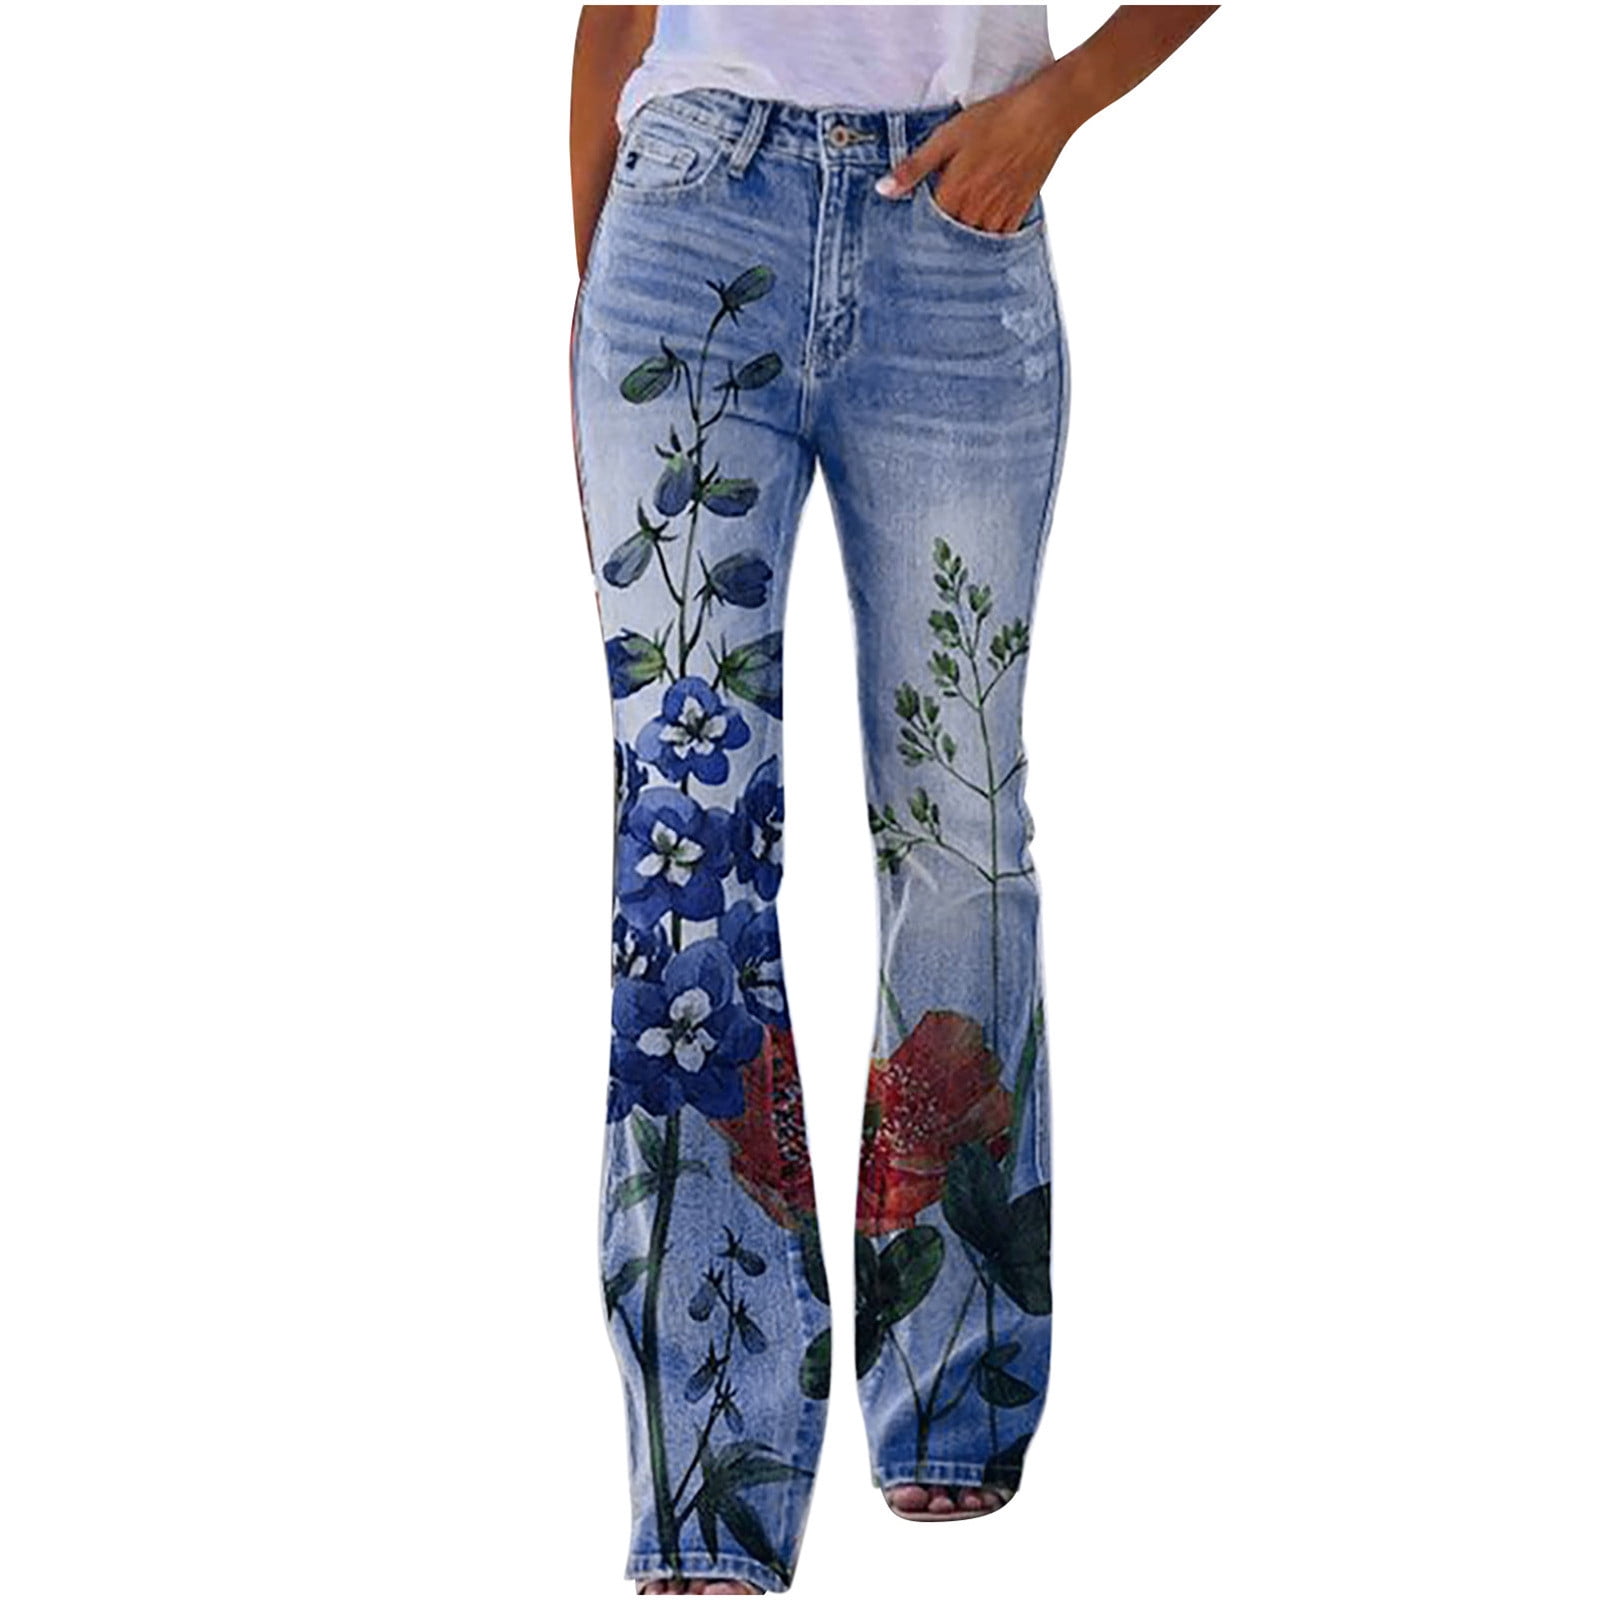 Buy BaronHong Women Loose Floral Embroidery Denim Elastic Waist Slim Ripped Jeans  Pants Trousers(Blue,M) at